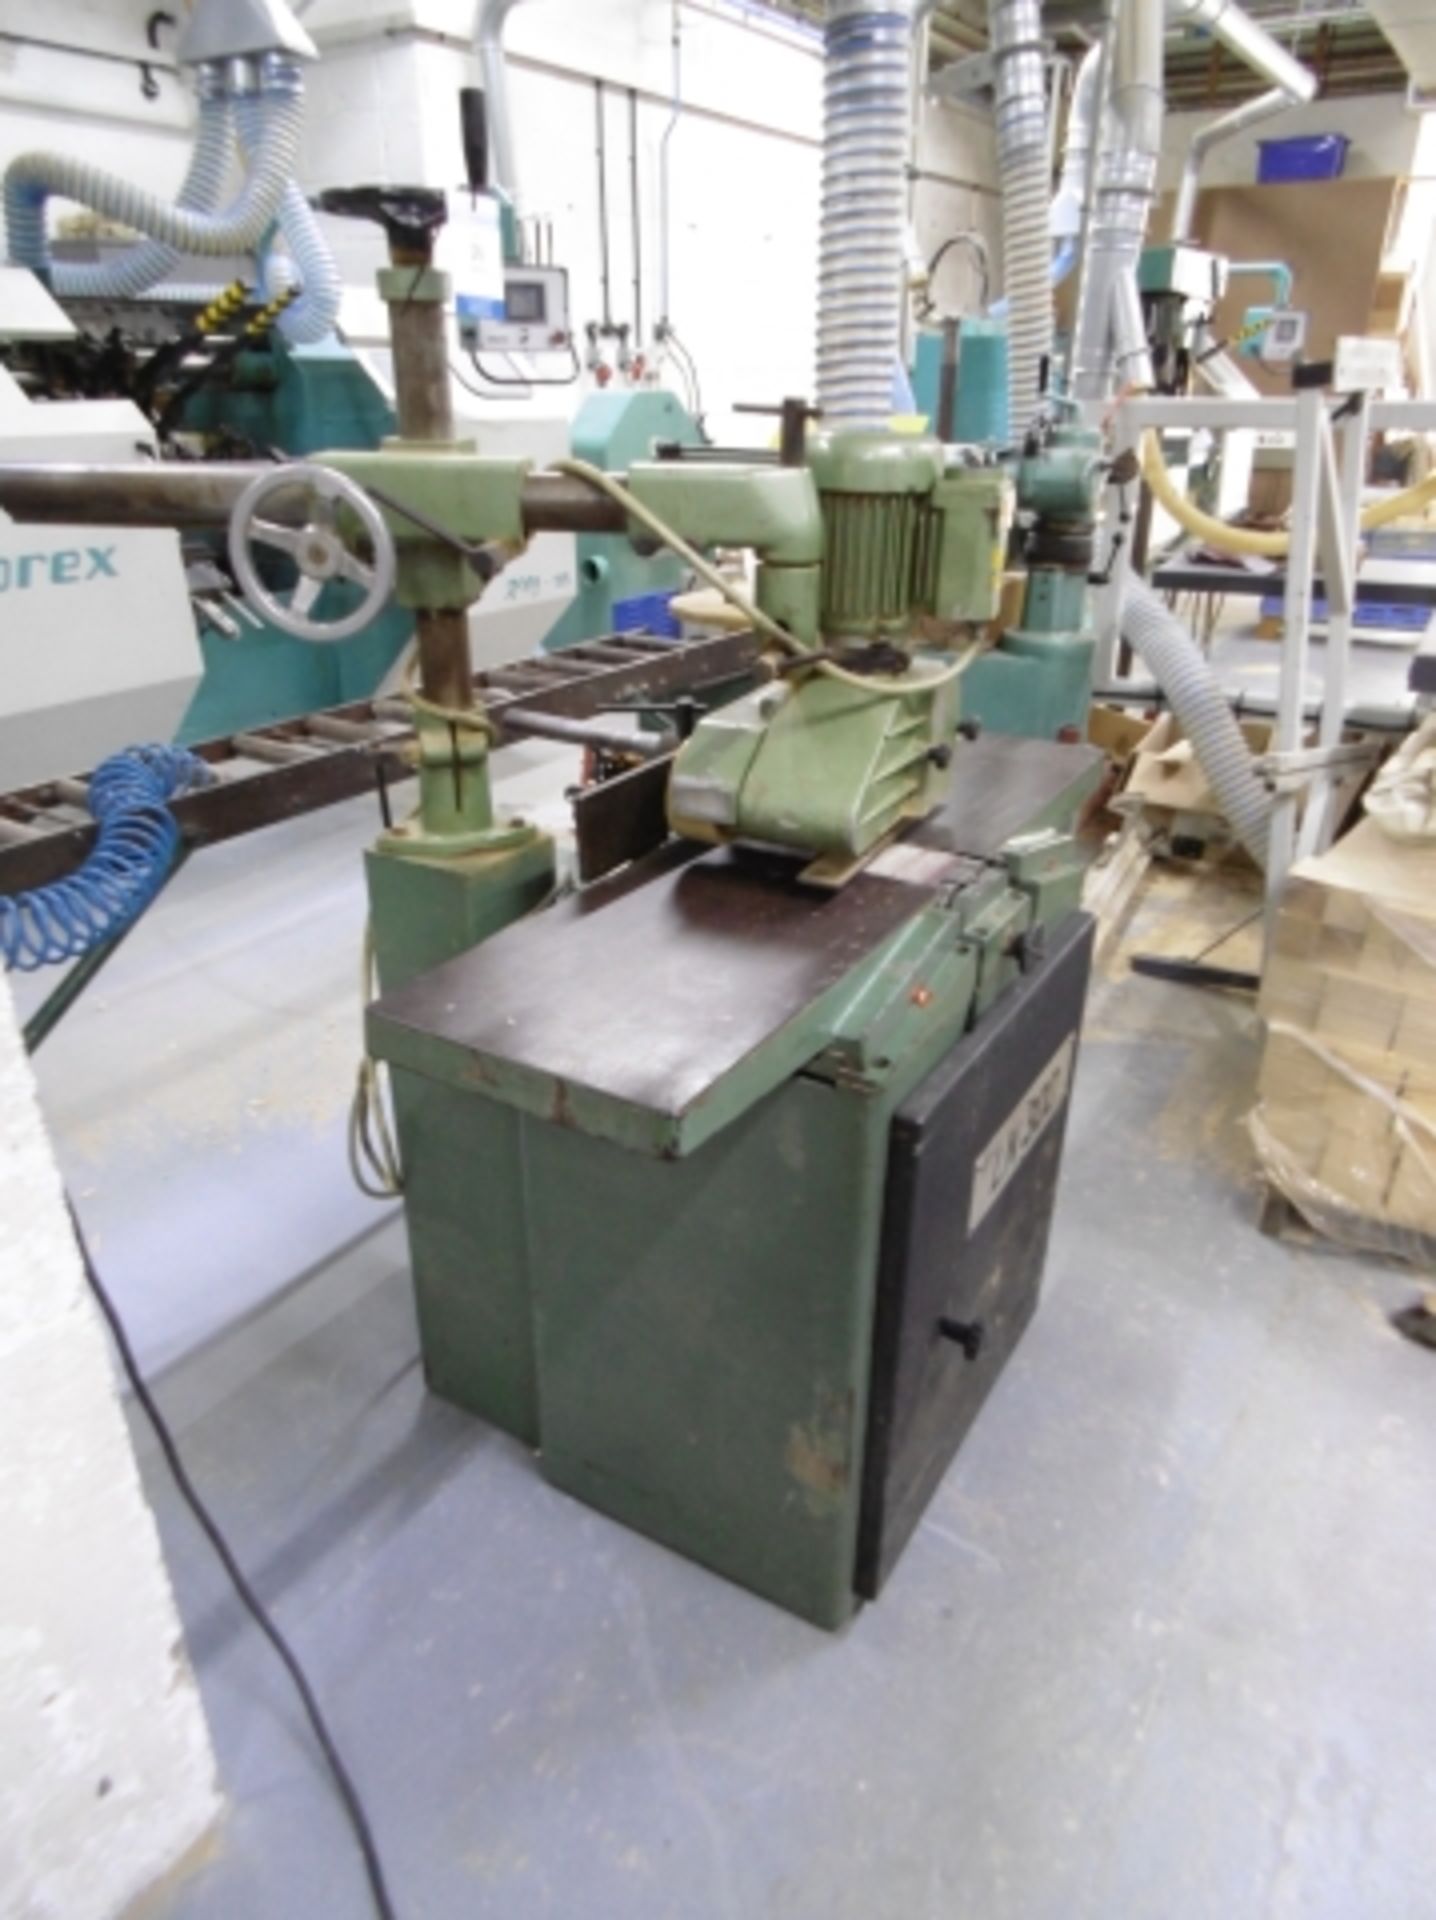 * Europa LN300 Bottom Belt Sander with Samco Power Feed. 300mm wide belt and 1230mm table length. - Image 4 of 5